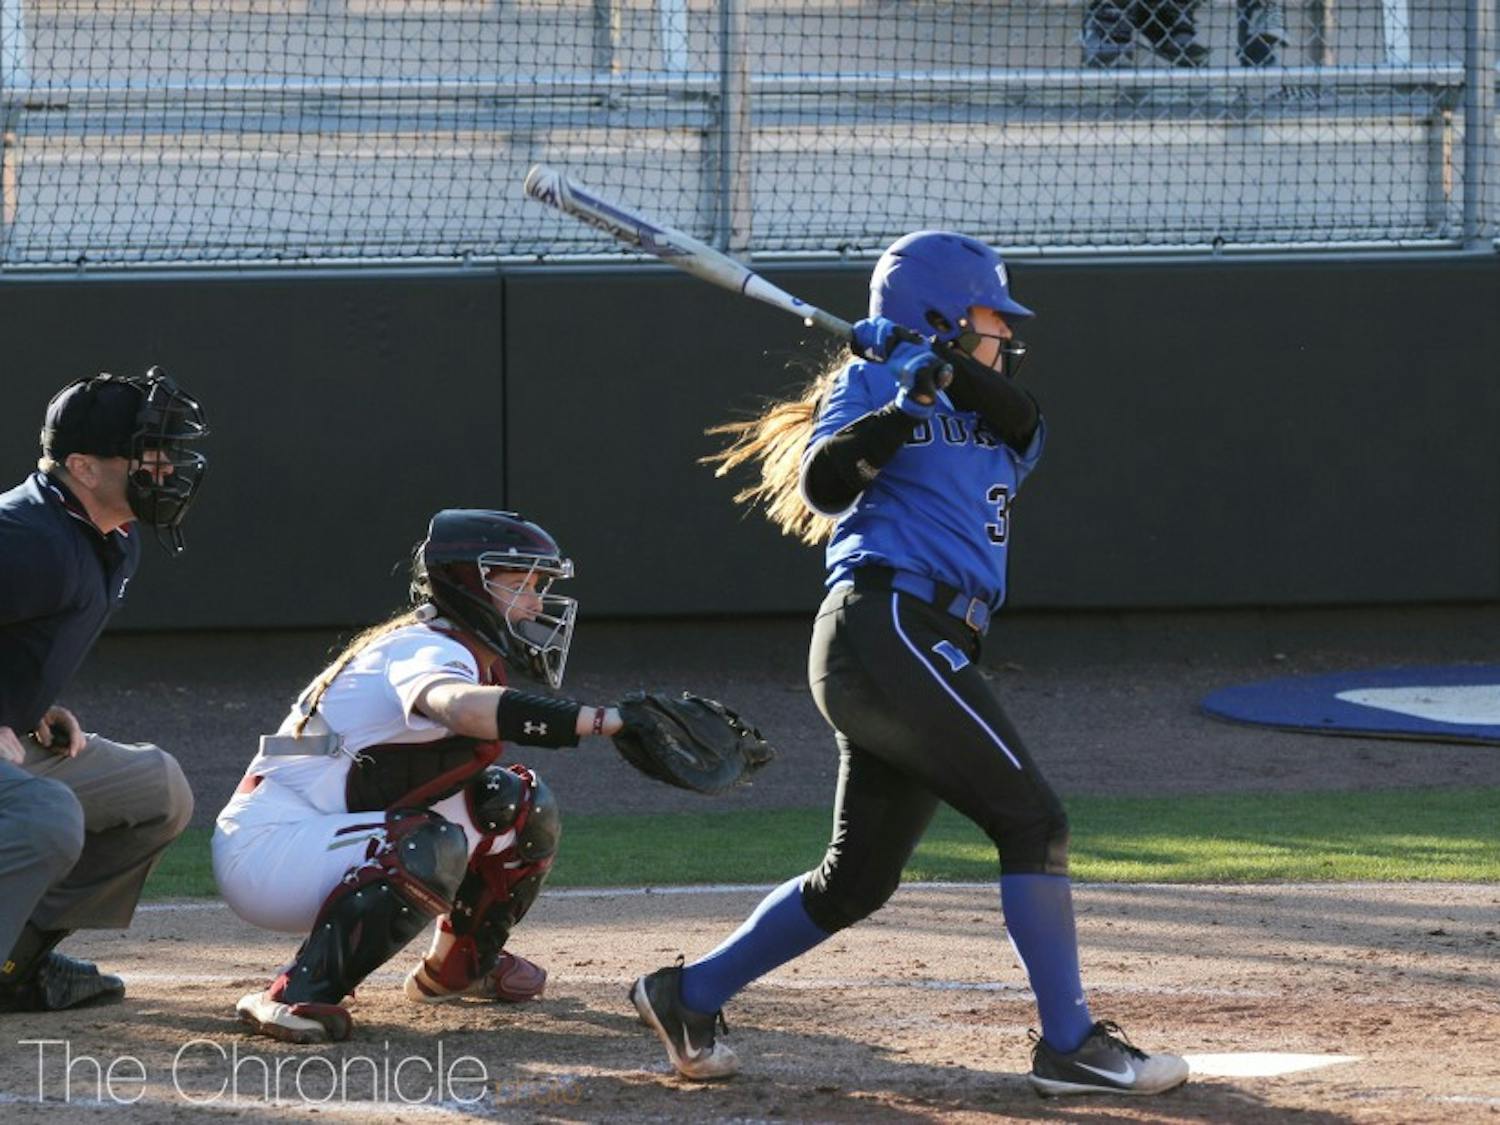 Haley Wymbs singled to set up Duke's fourth-inning rally in Sunday's decisive series finale.